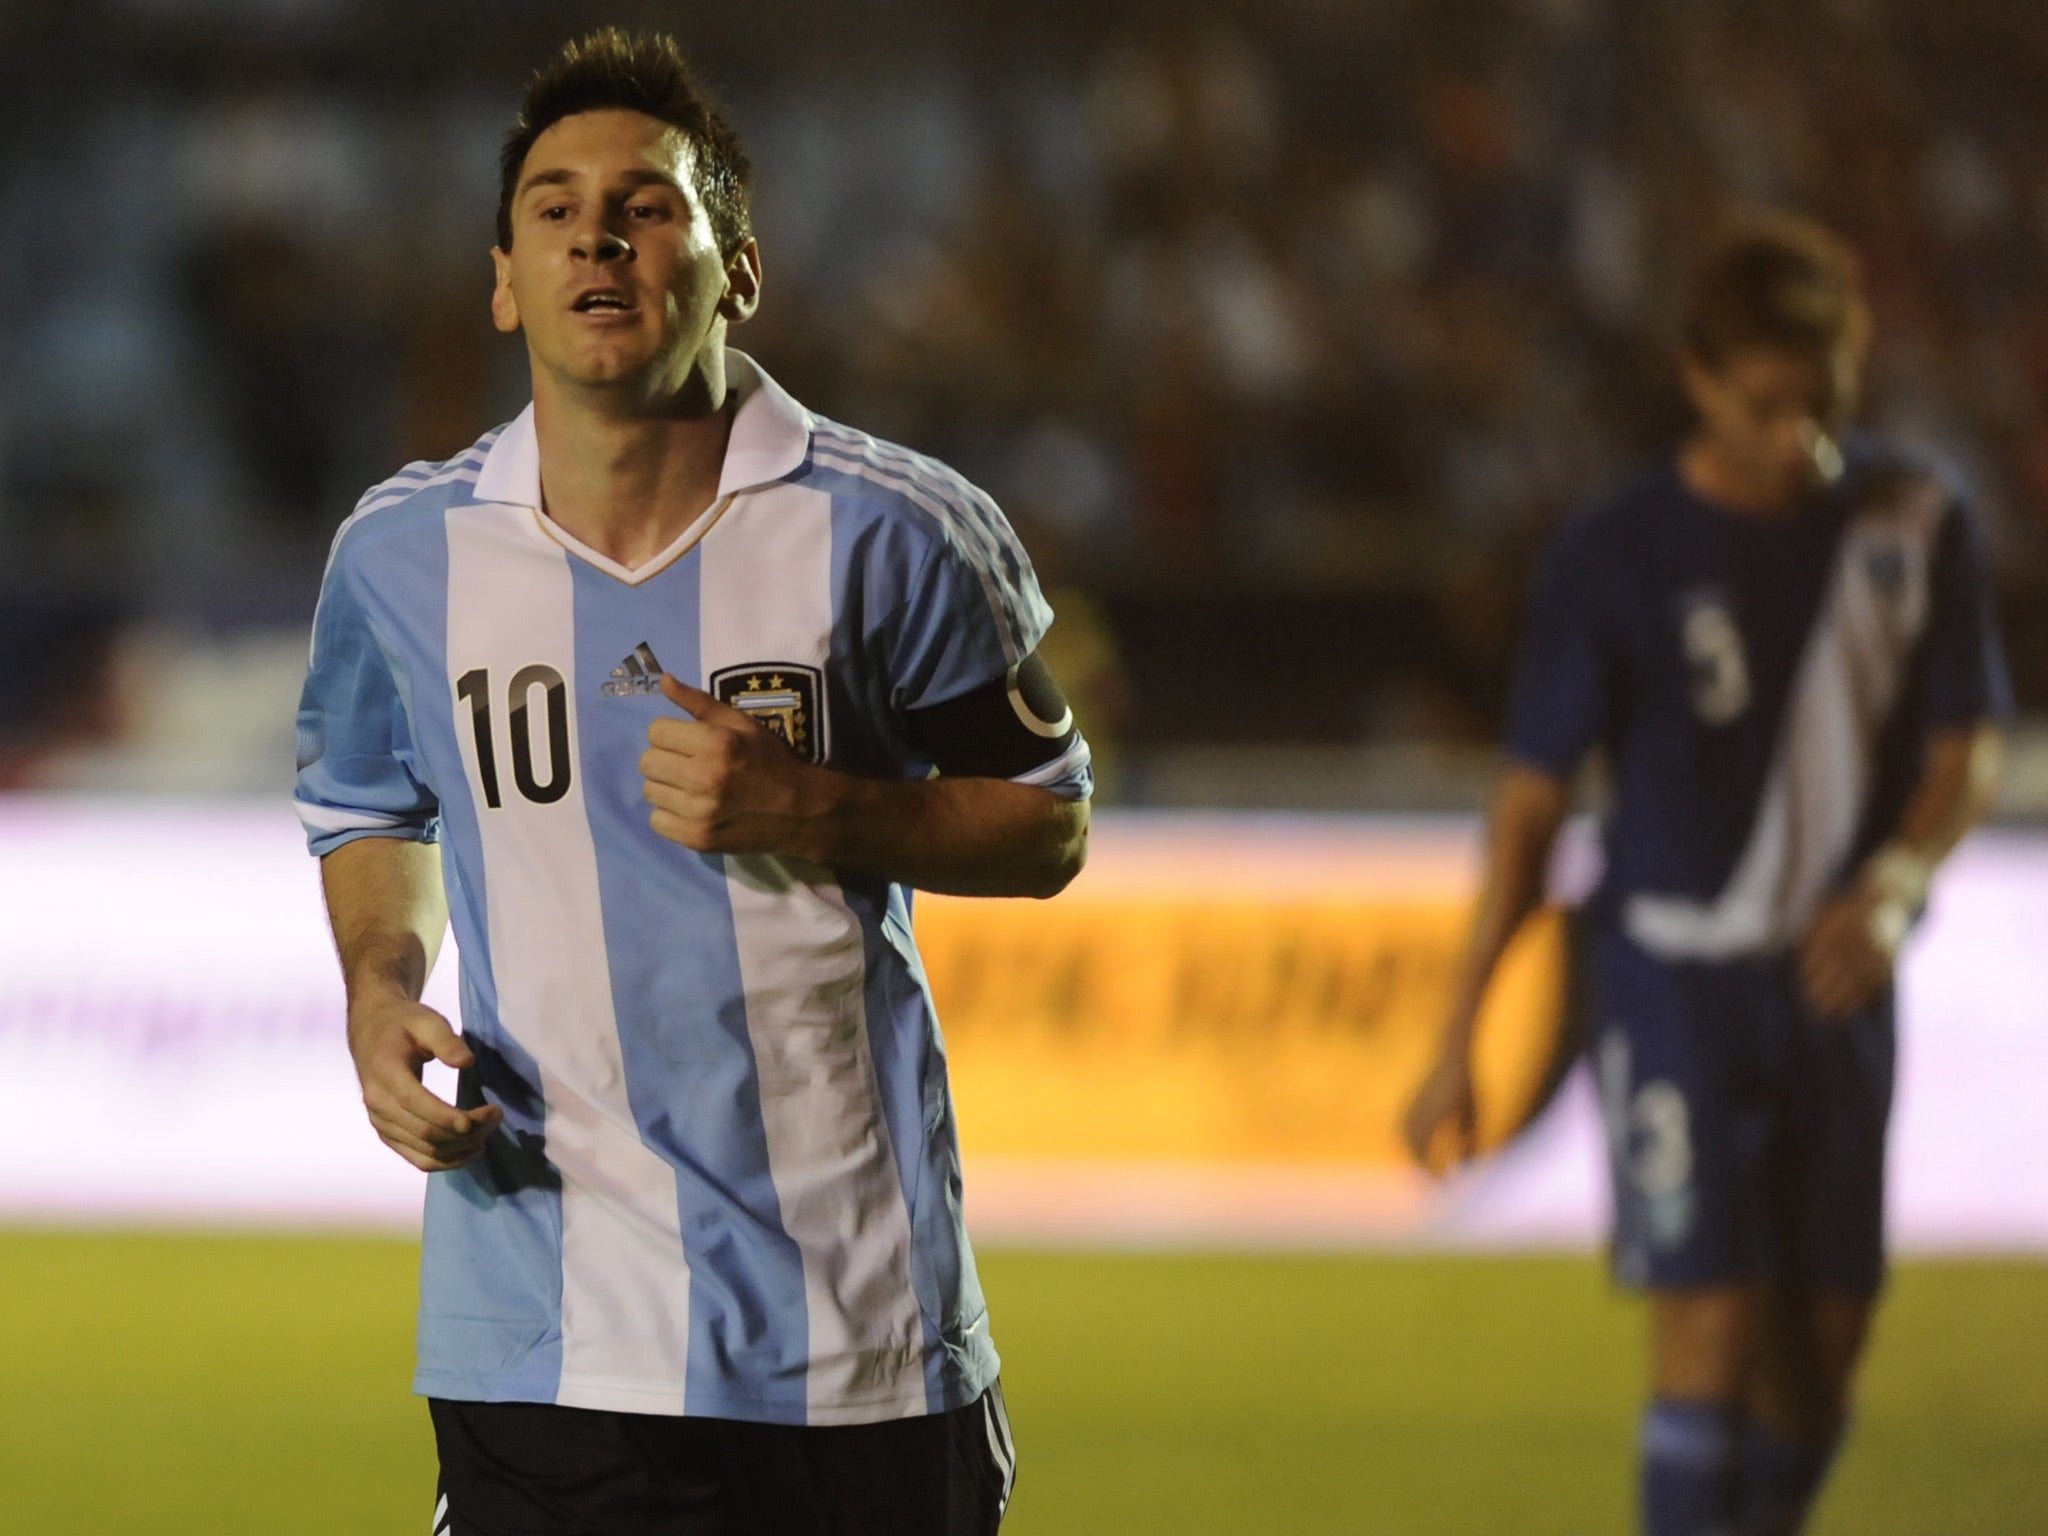 Lionel Messi scored a hat-trick in the 4-0 victory over Guatamala